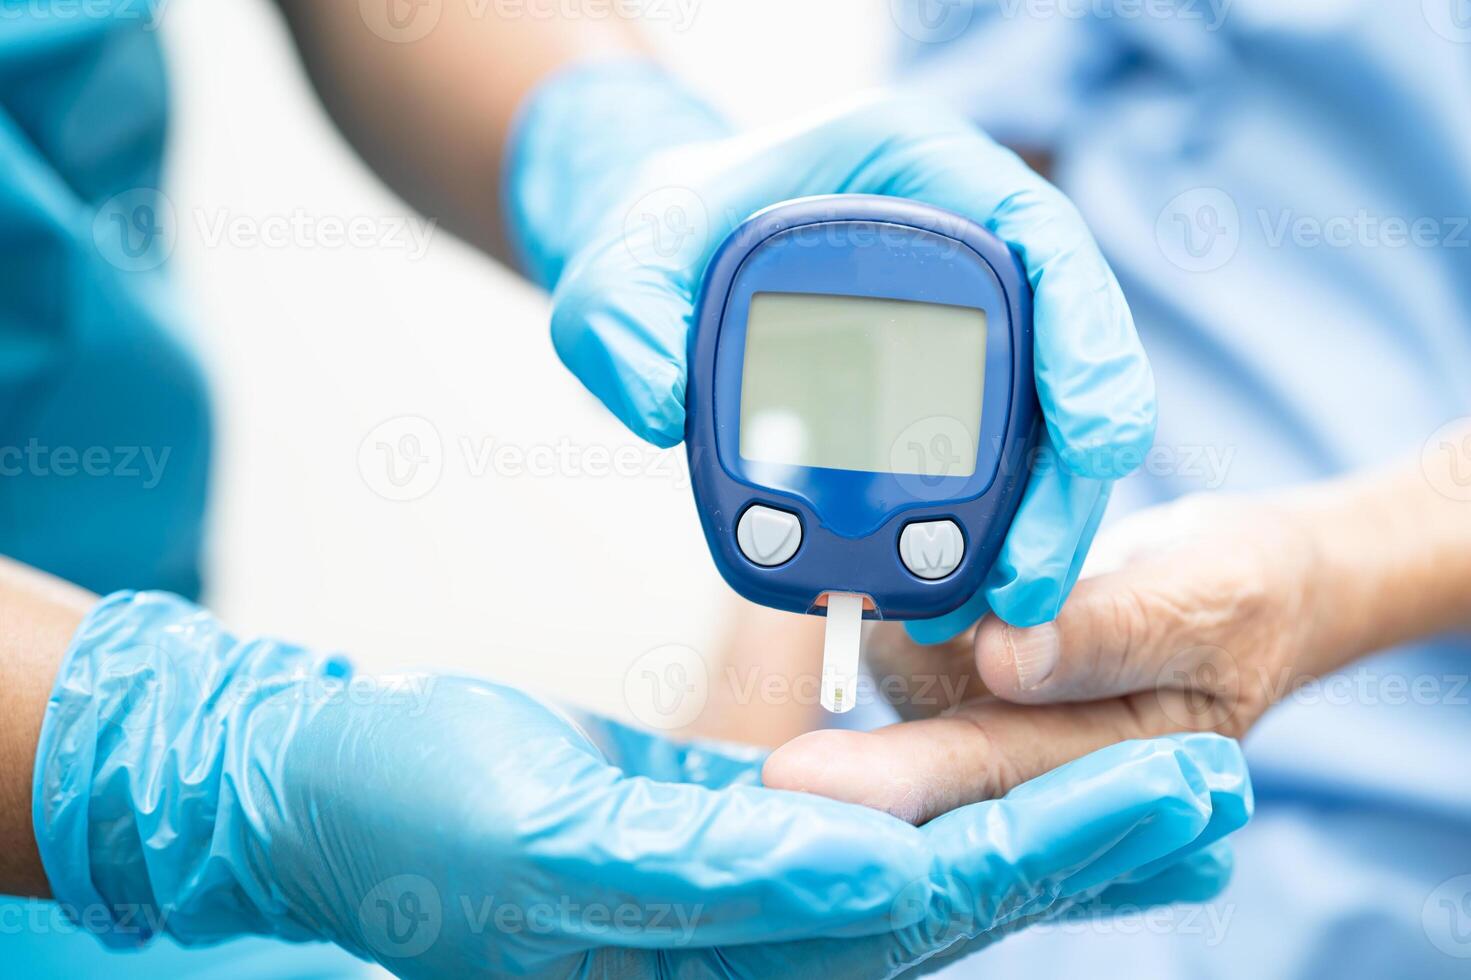 Doctor check diabetes from finger blood sugar level with finger lancet. photo